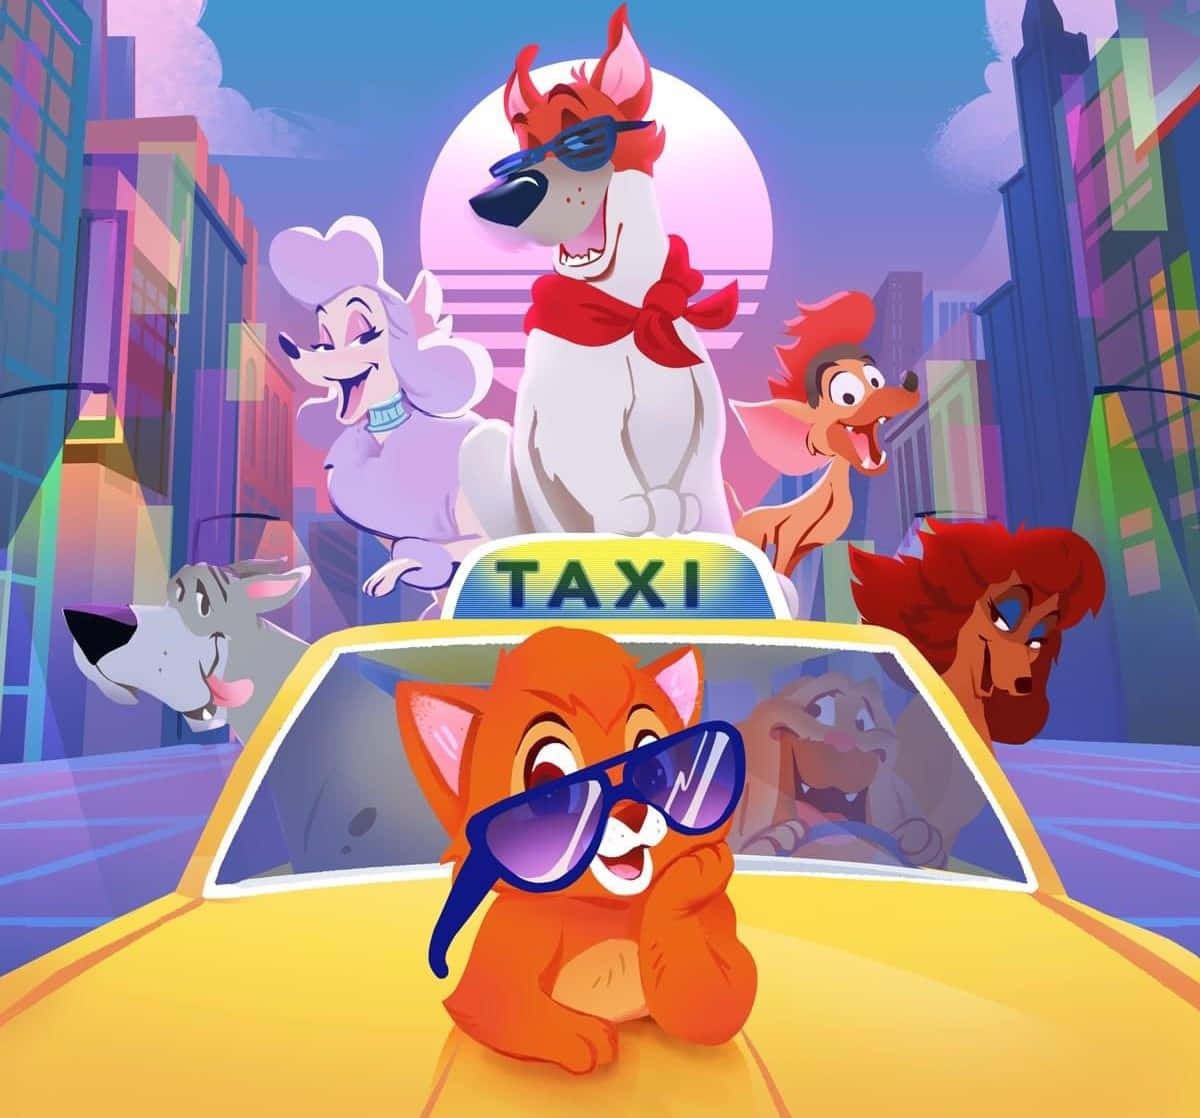 Oliver And Company - A Group Of Animated Animal Friends On An Adventure Wallpaper